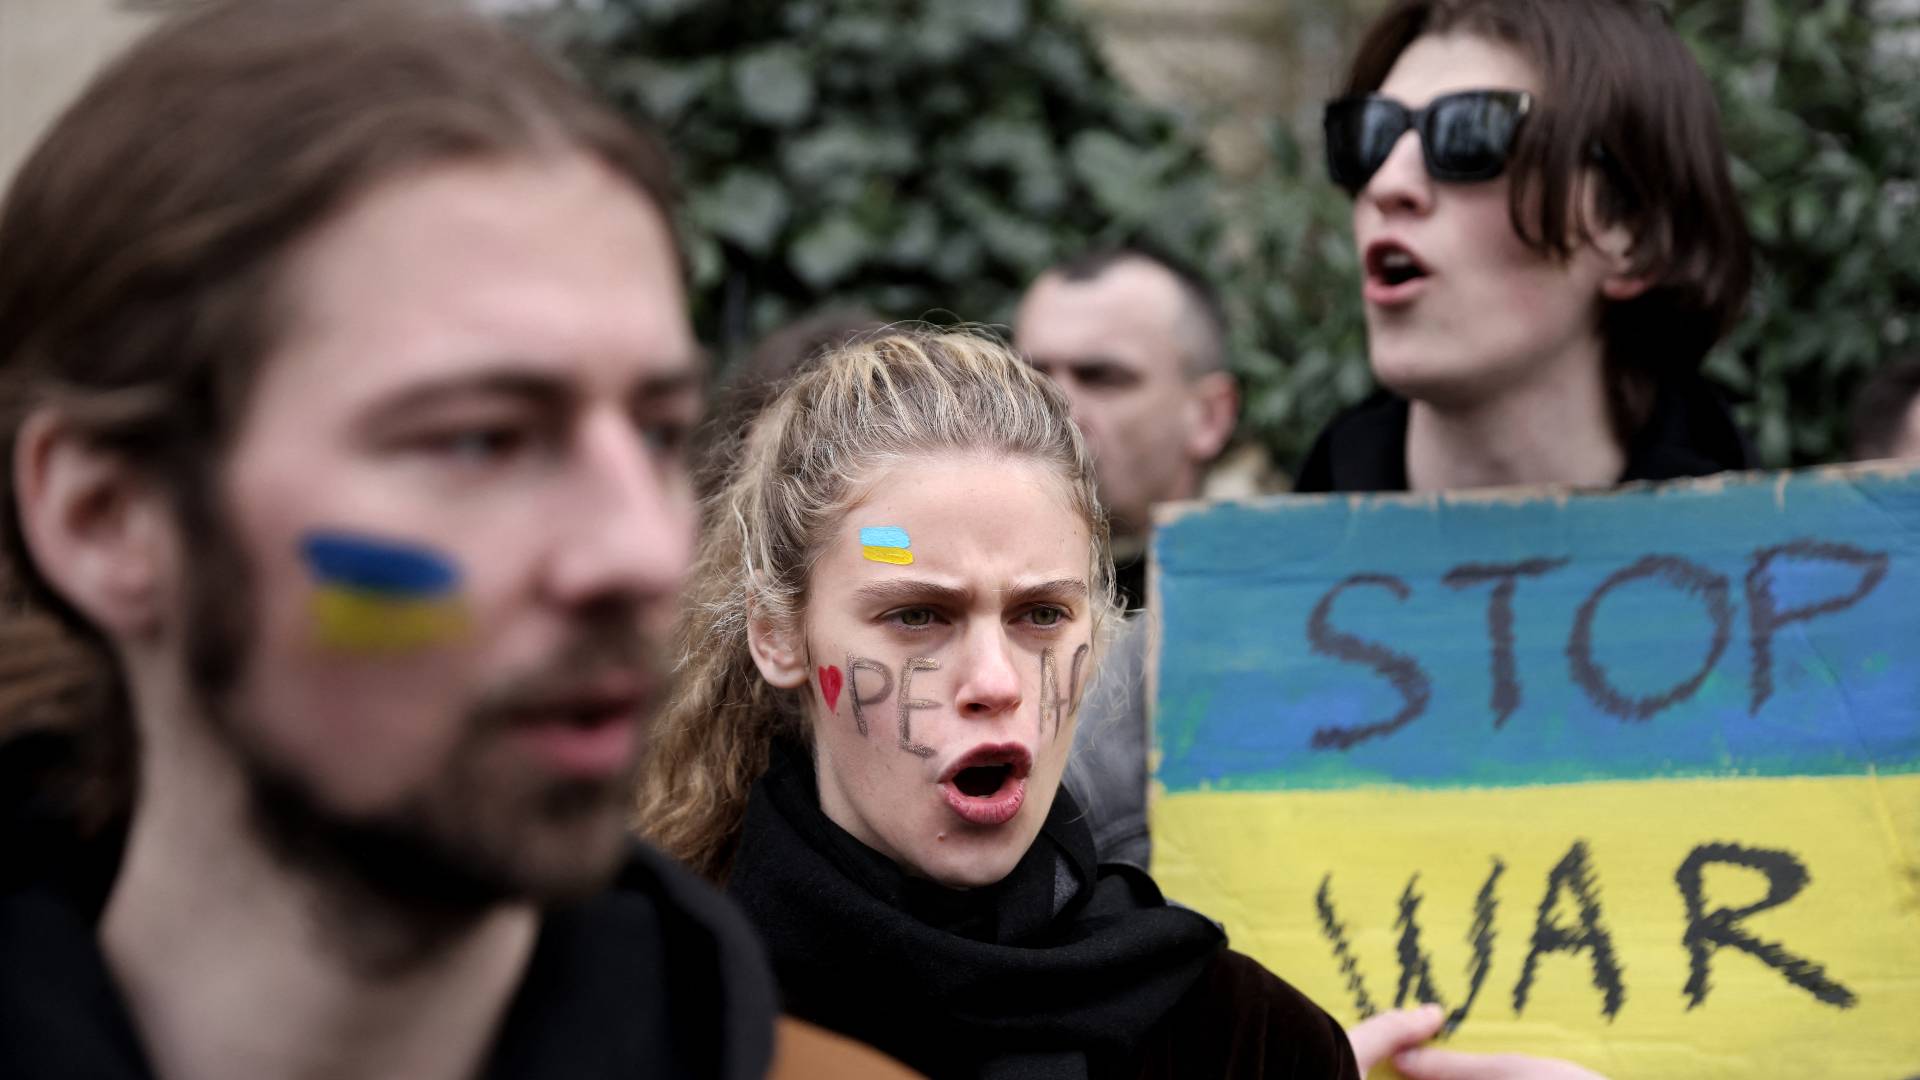 Ukrainian citizens protest against Russia's military operation in Ukraine in front of the Russian embassy in Paris on February 24, 2022.